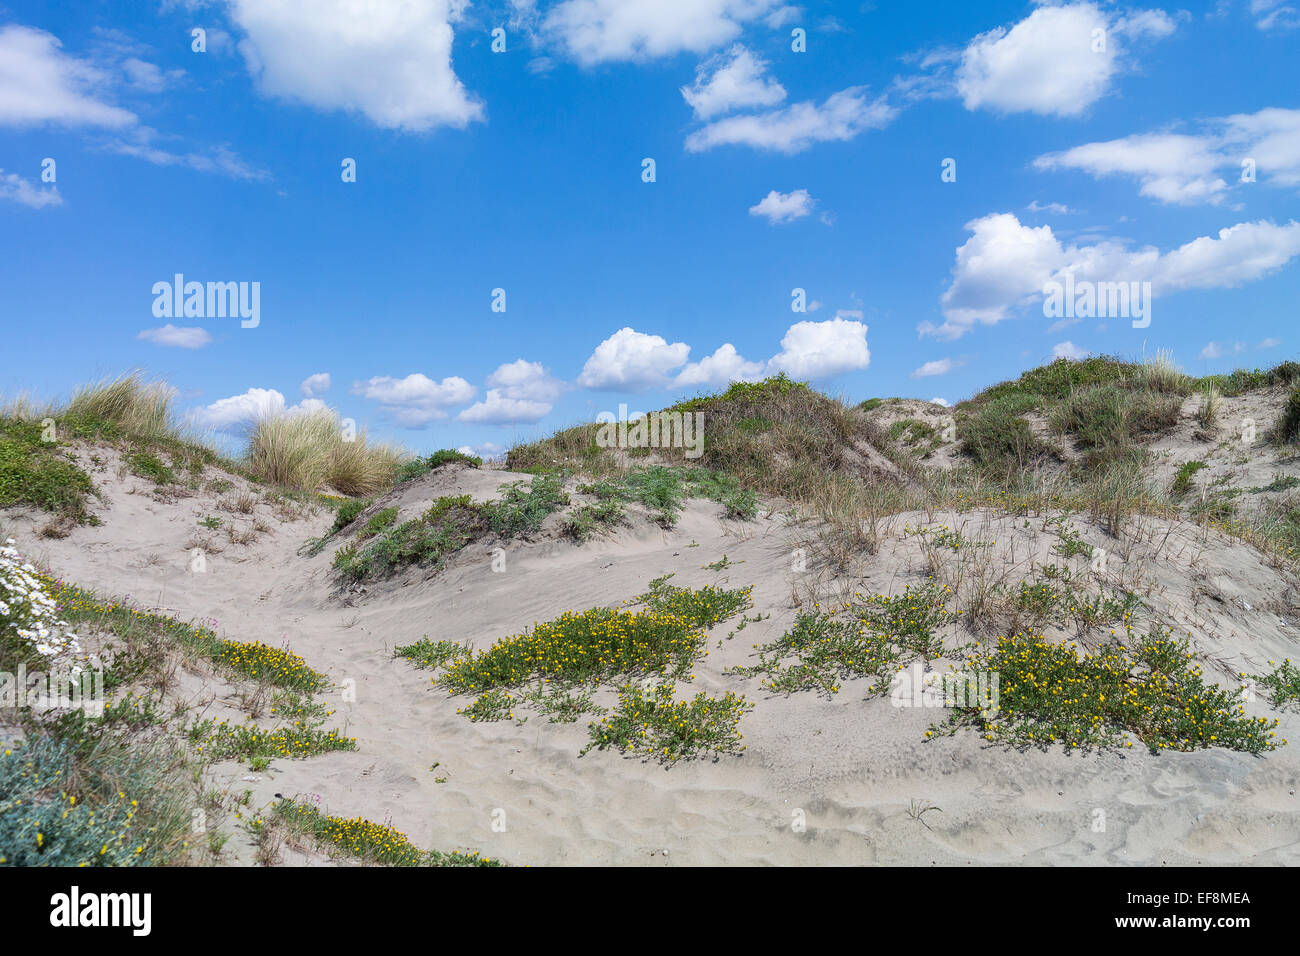 Sand dunes by the beach. Roman littoral. Italy. Stock Photo